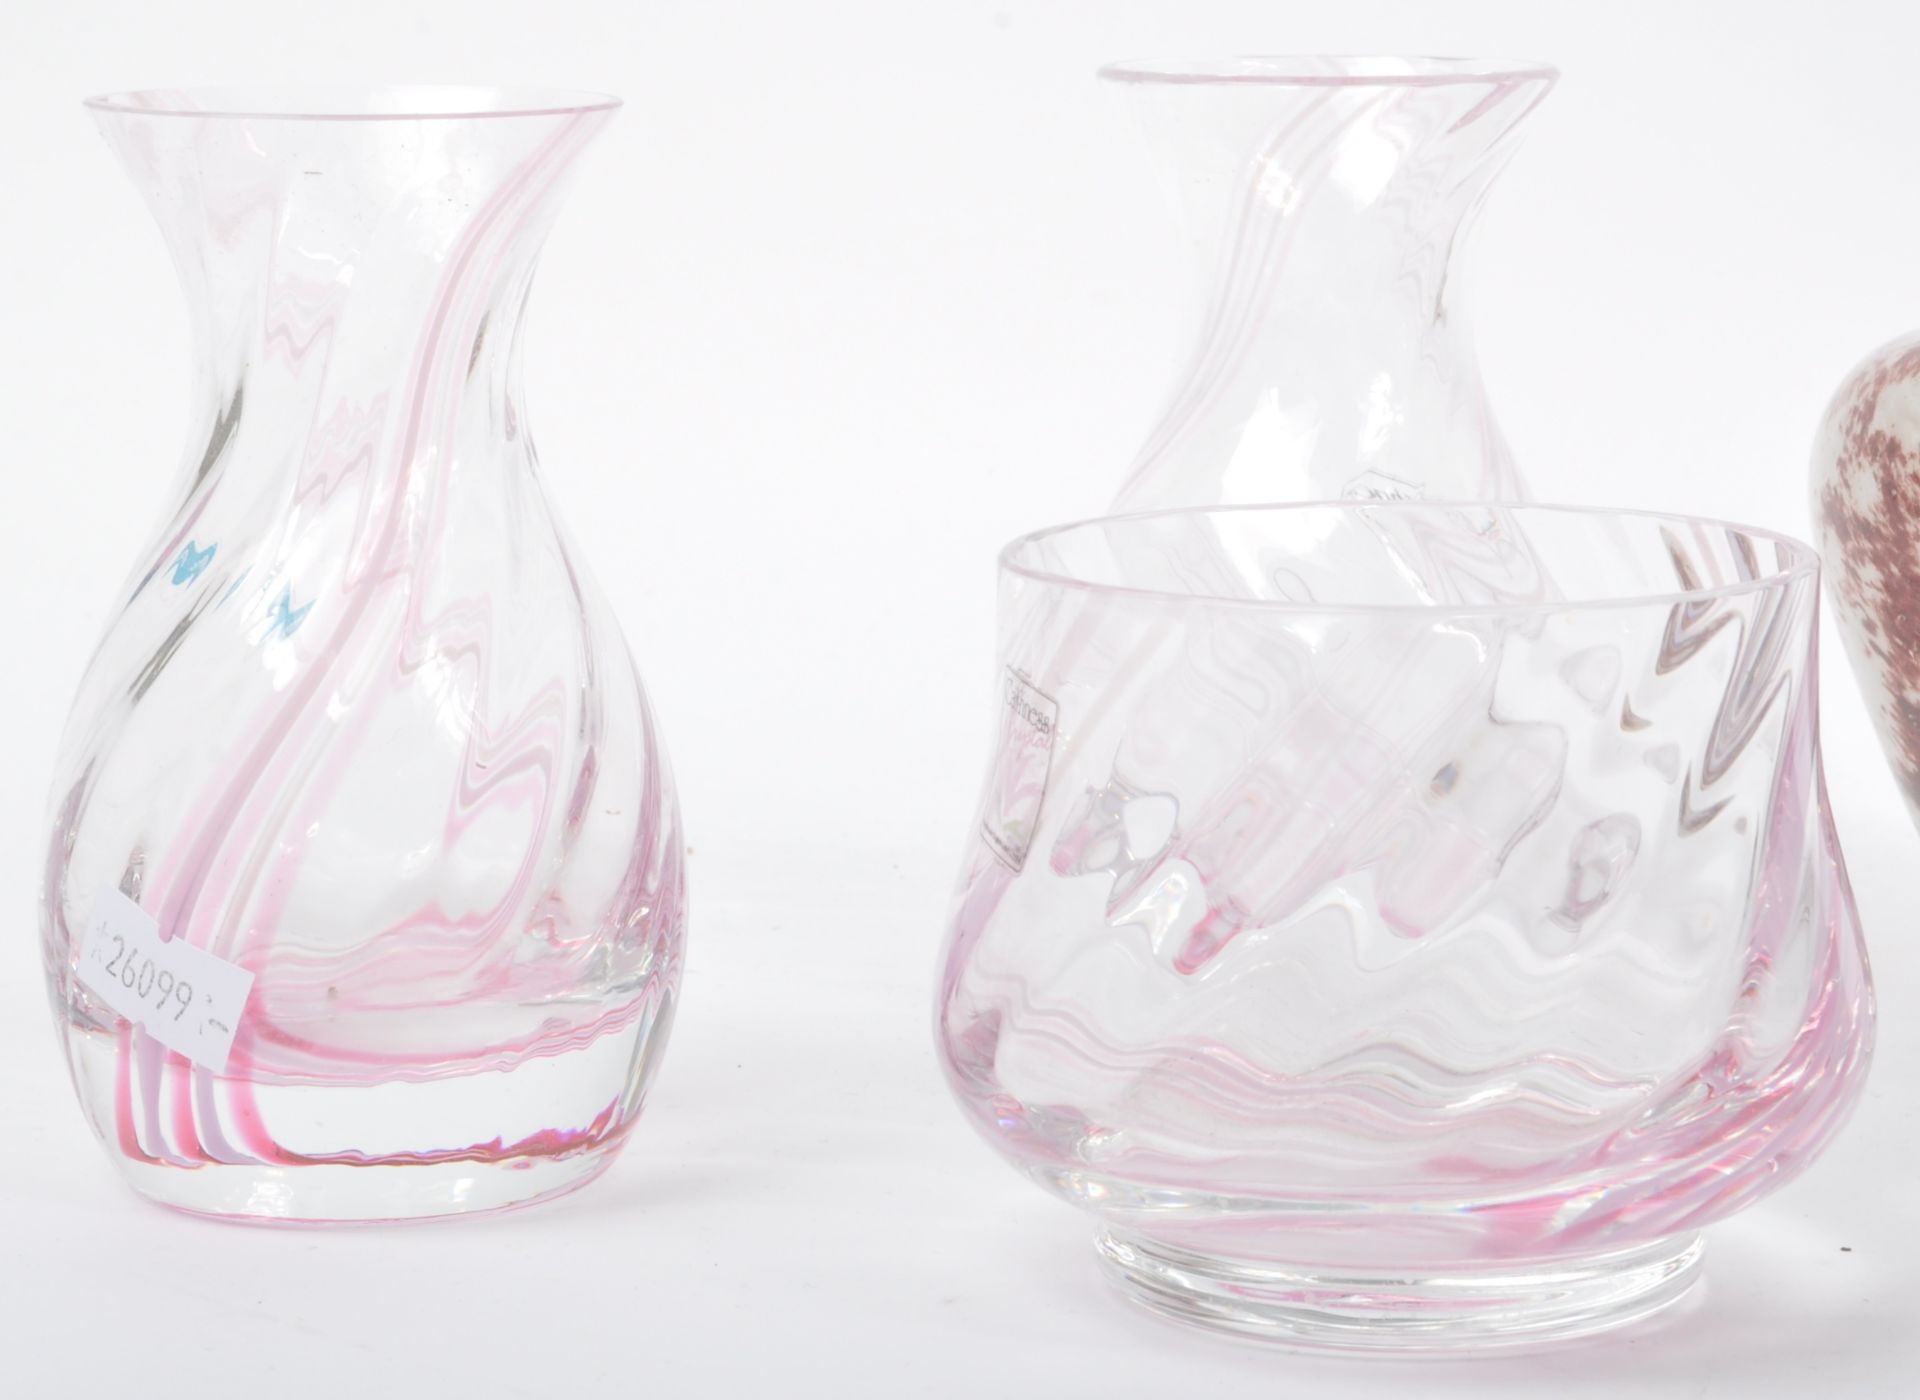 COLLECTION OF LATE 20TH CENTURY STUDIO ART GLASS - Image 2 of 5